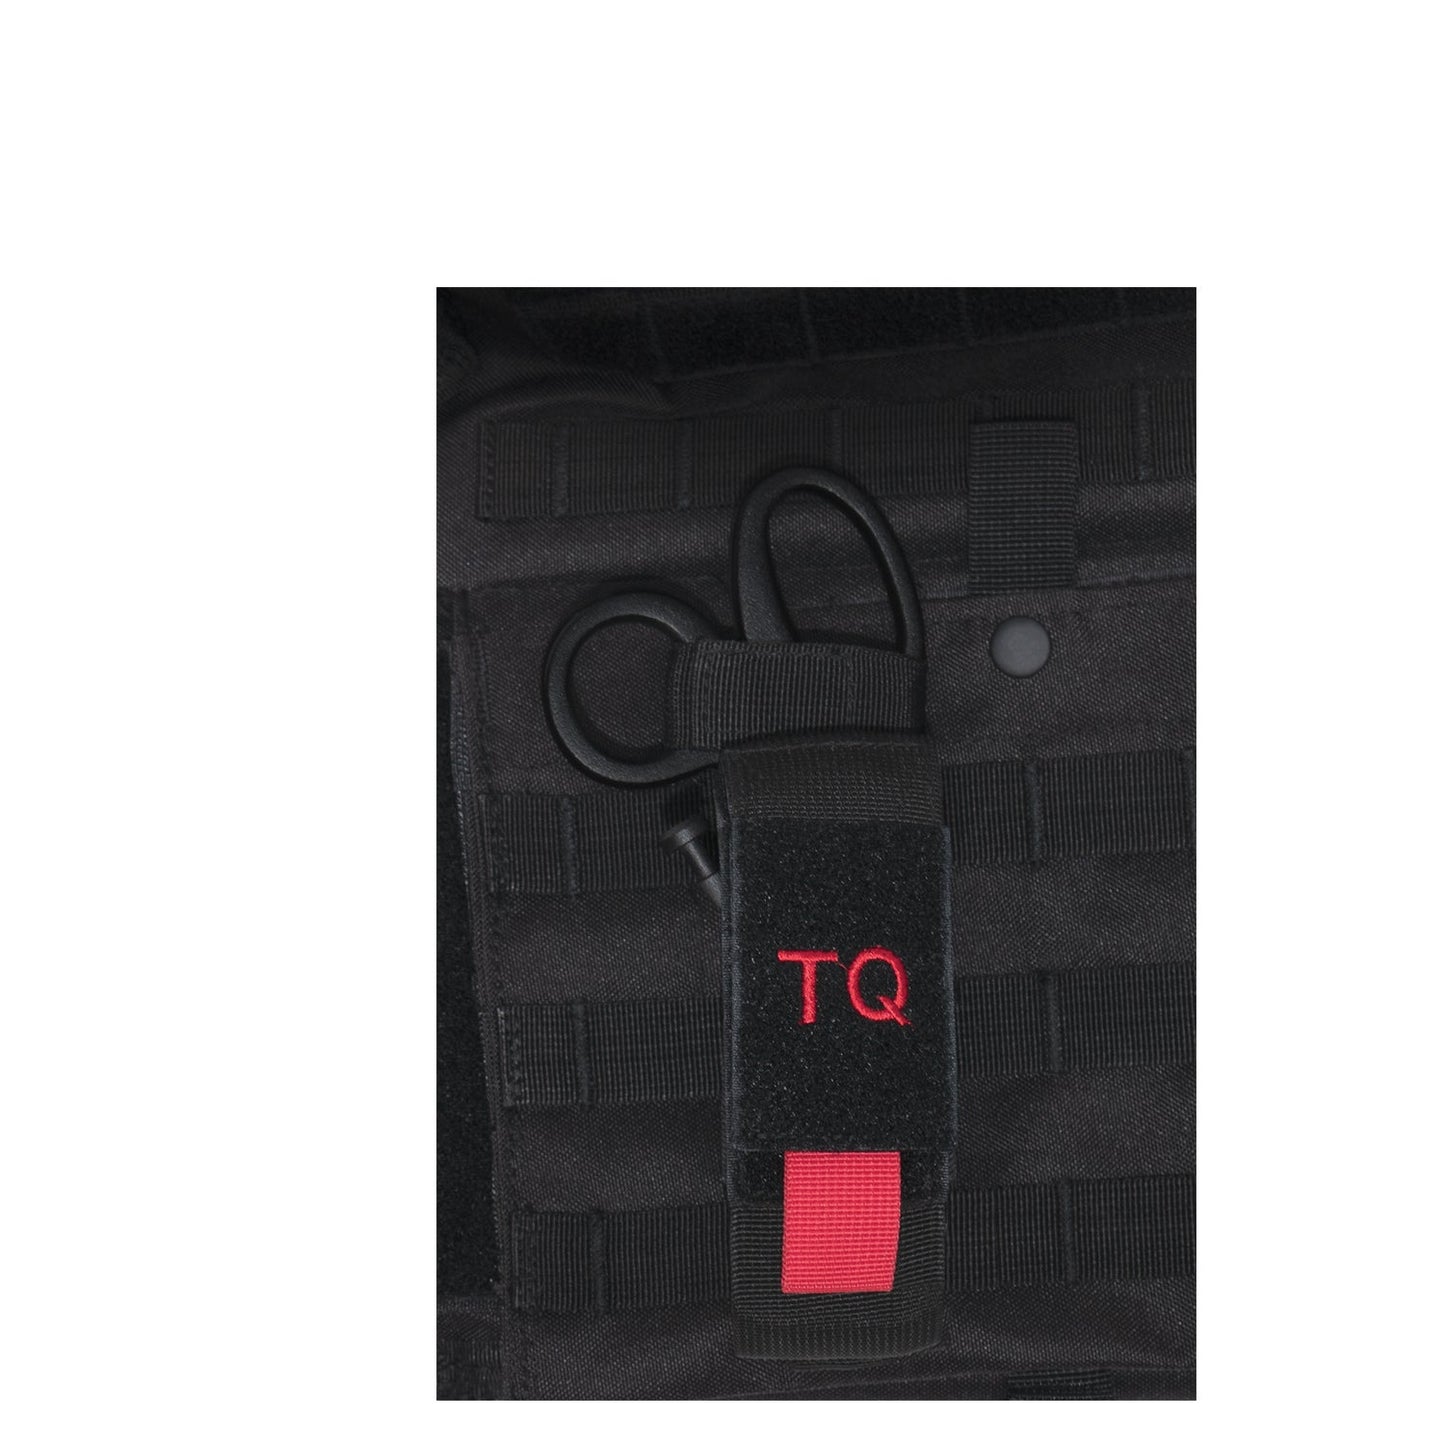 Rothco’s Tactical “TQ” Pouch is designed to hold your tourniquet and shears with an elastic hook & loop compartment and a hidden back pocket with a horizontal hook and loop strap that feeds through the handle of your shears. 